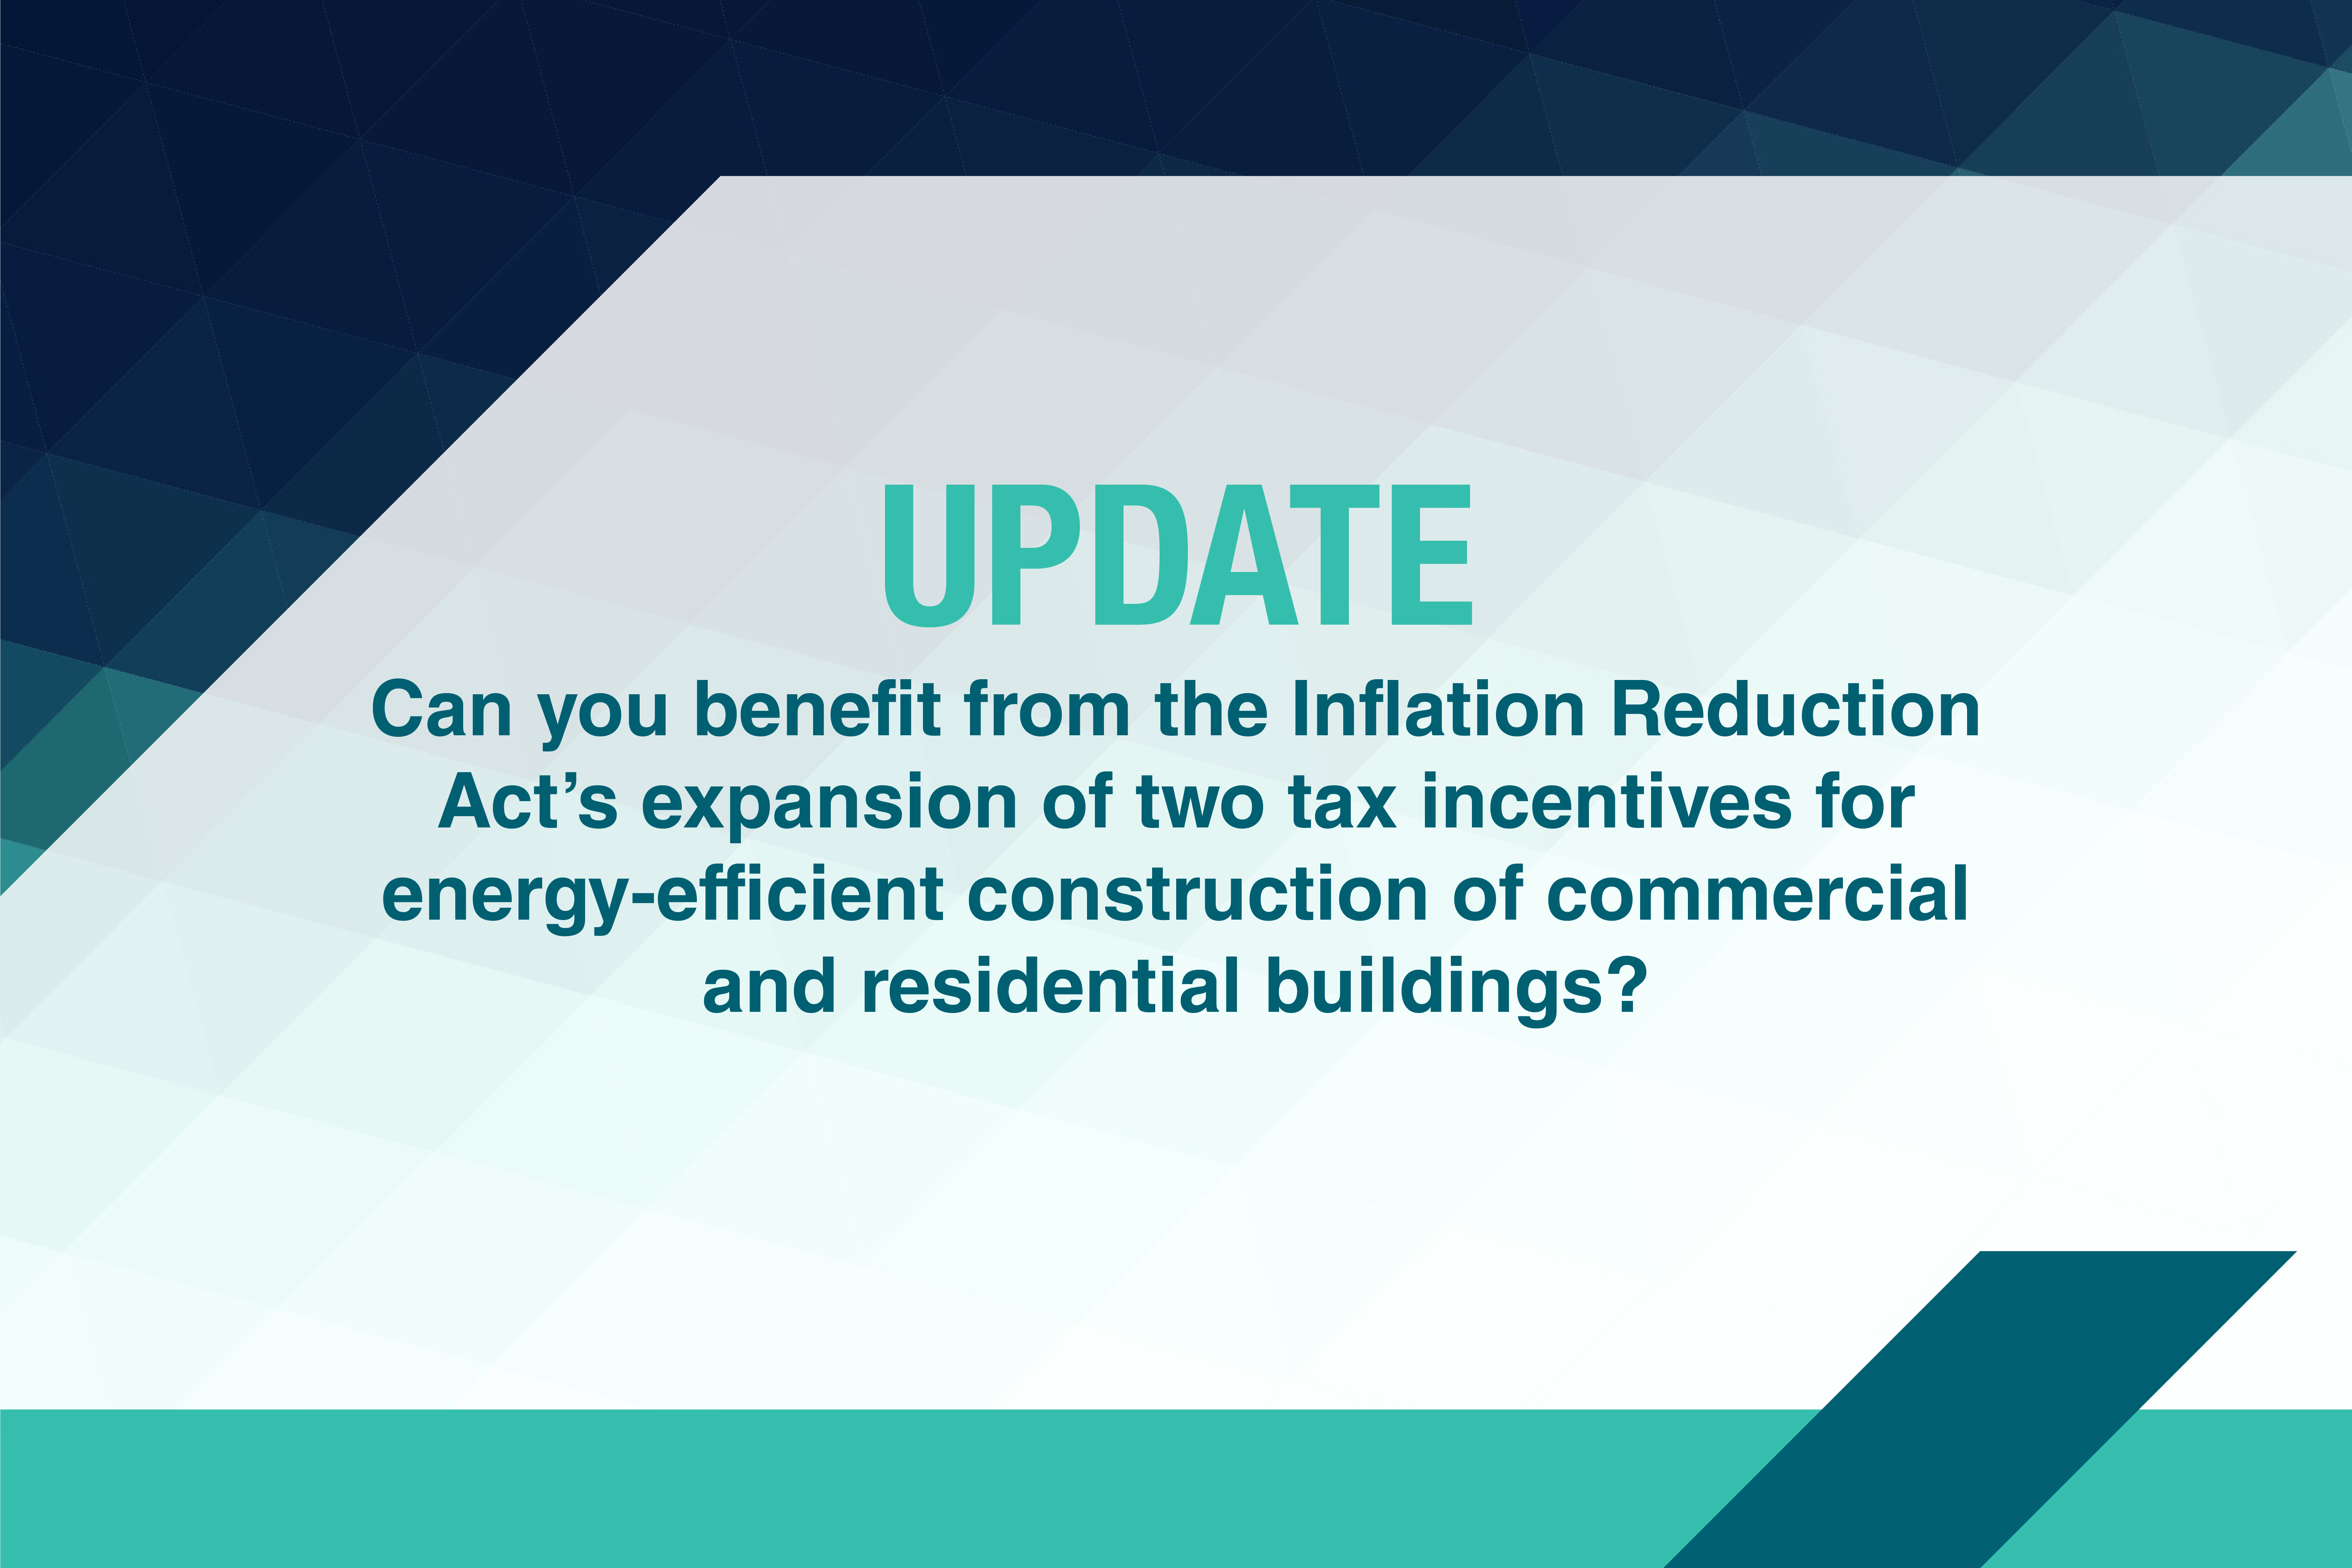 Inflation Reduction Act expands deductions for energy-efficient construction